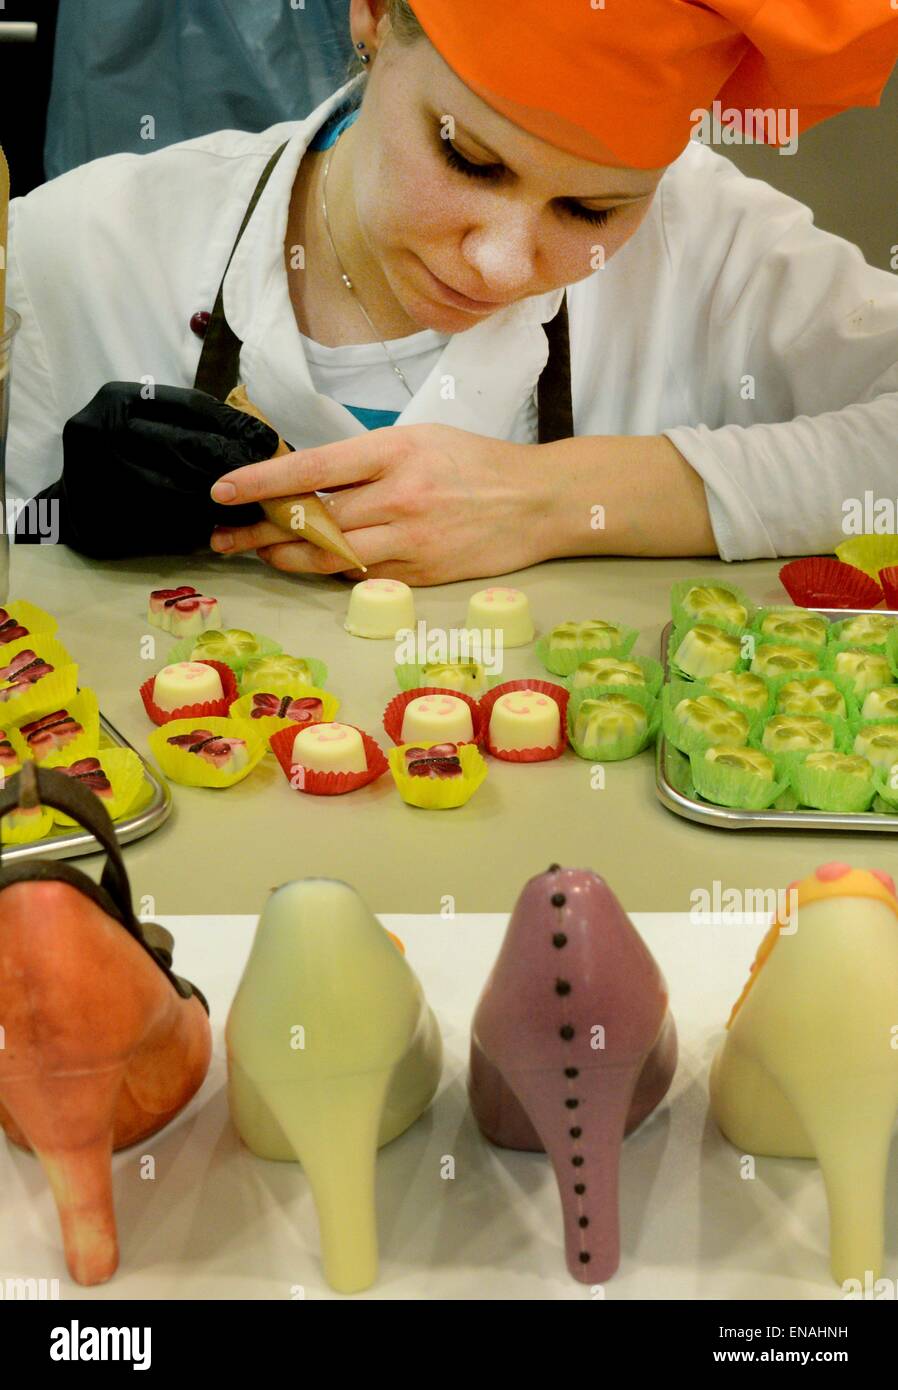 Oldisleben, Germany. 10th Apr, 2015. Master confectionist, Juliane Siedler, words on pralines and edible high heels in the display area of Karin Finger's Goethe Chocolate Factory in Oldisleben, Germany, 10 April 2015. The colorful high-heeled shoes are part of the extensive, high-quality praline production at her company, which was founded ten years ago. Photo: WALTRAUD GRUBITZSCH/dpa/Alamy Live News Stock Photo